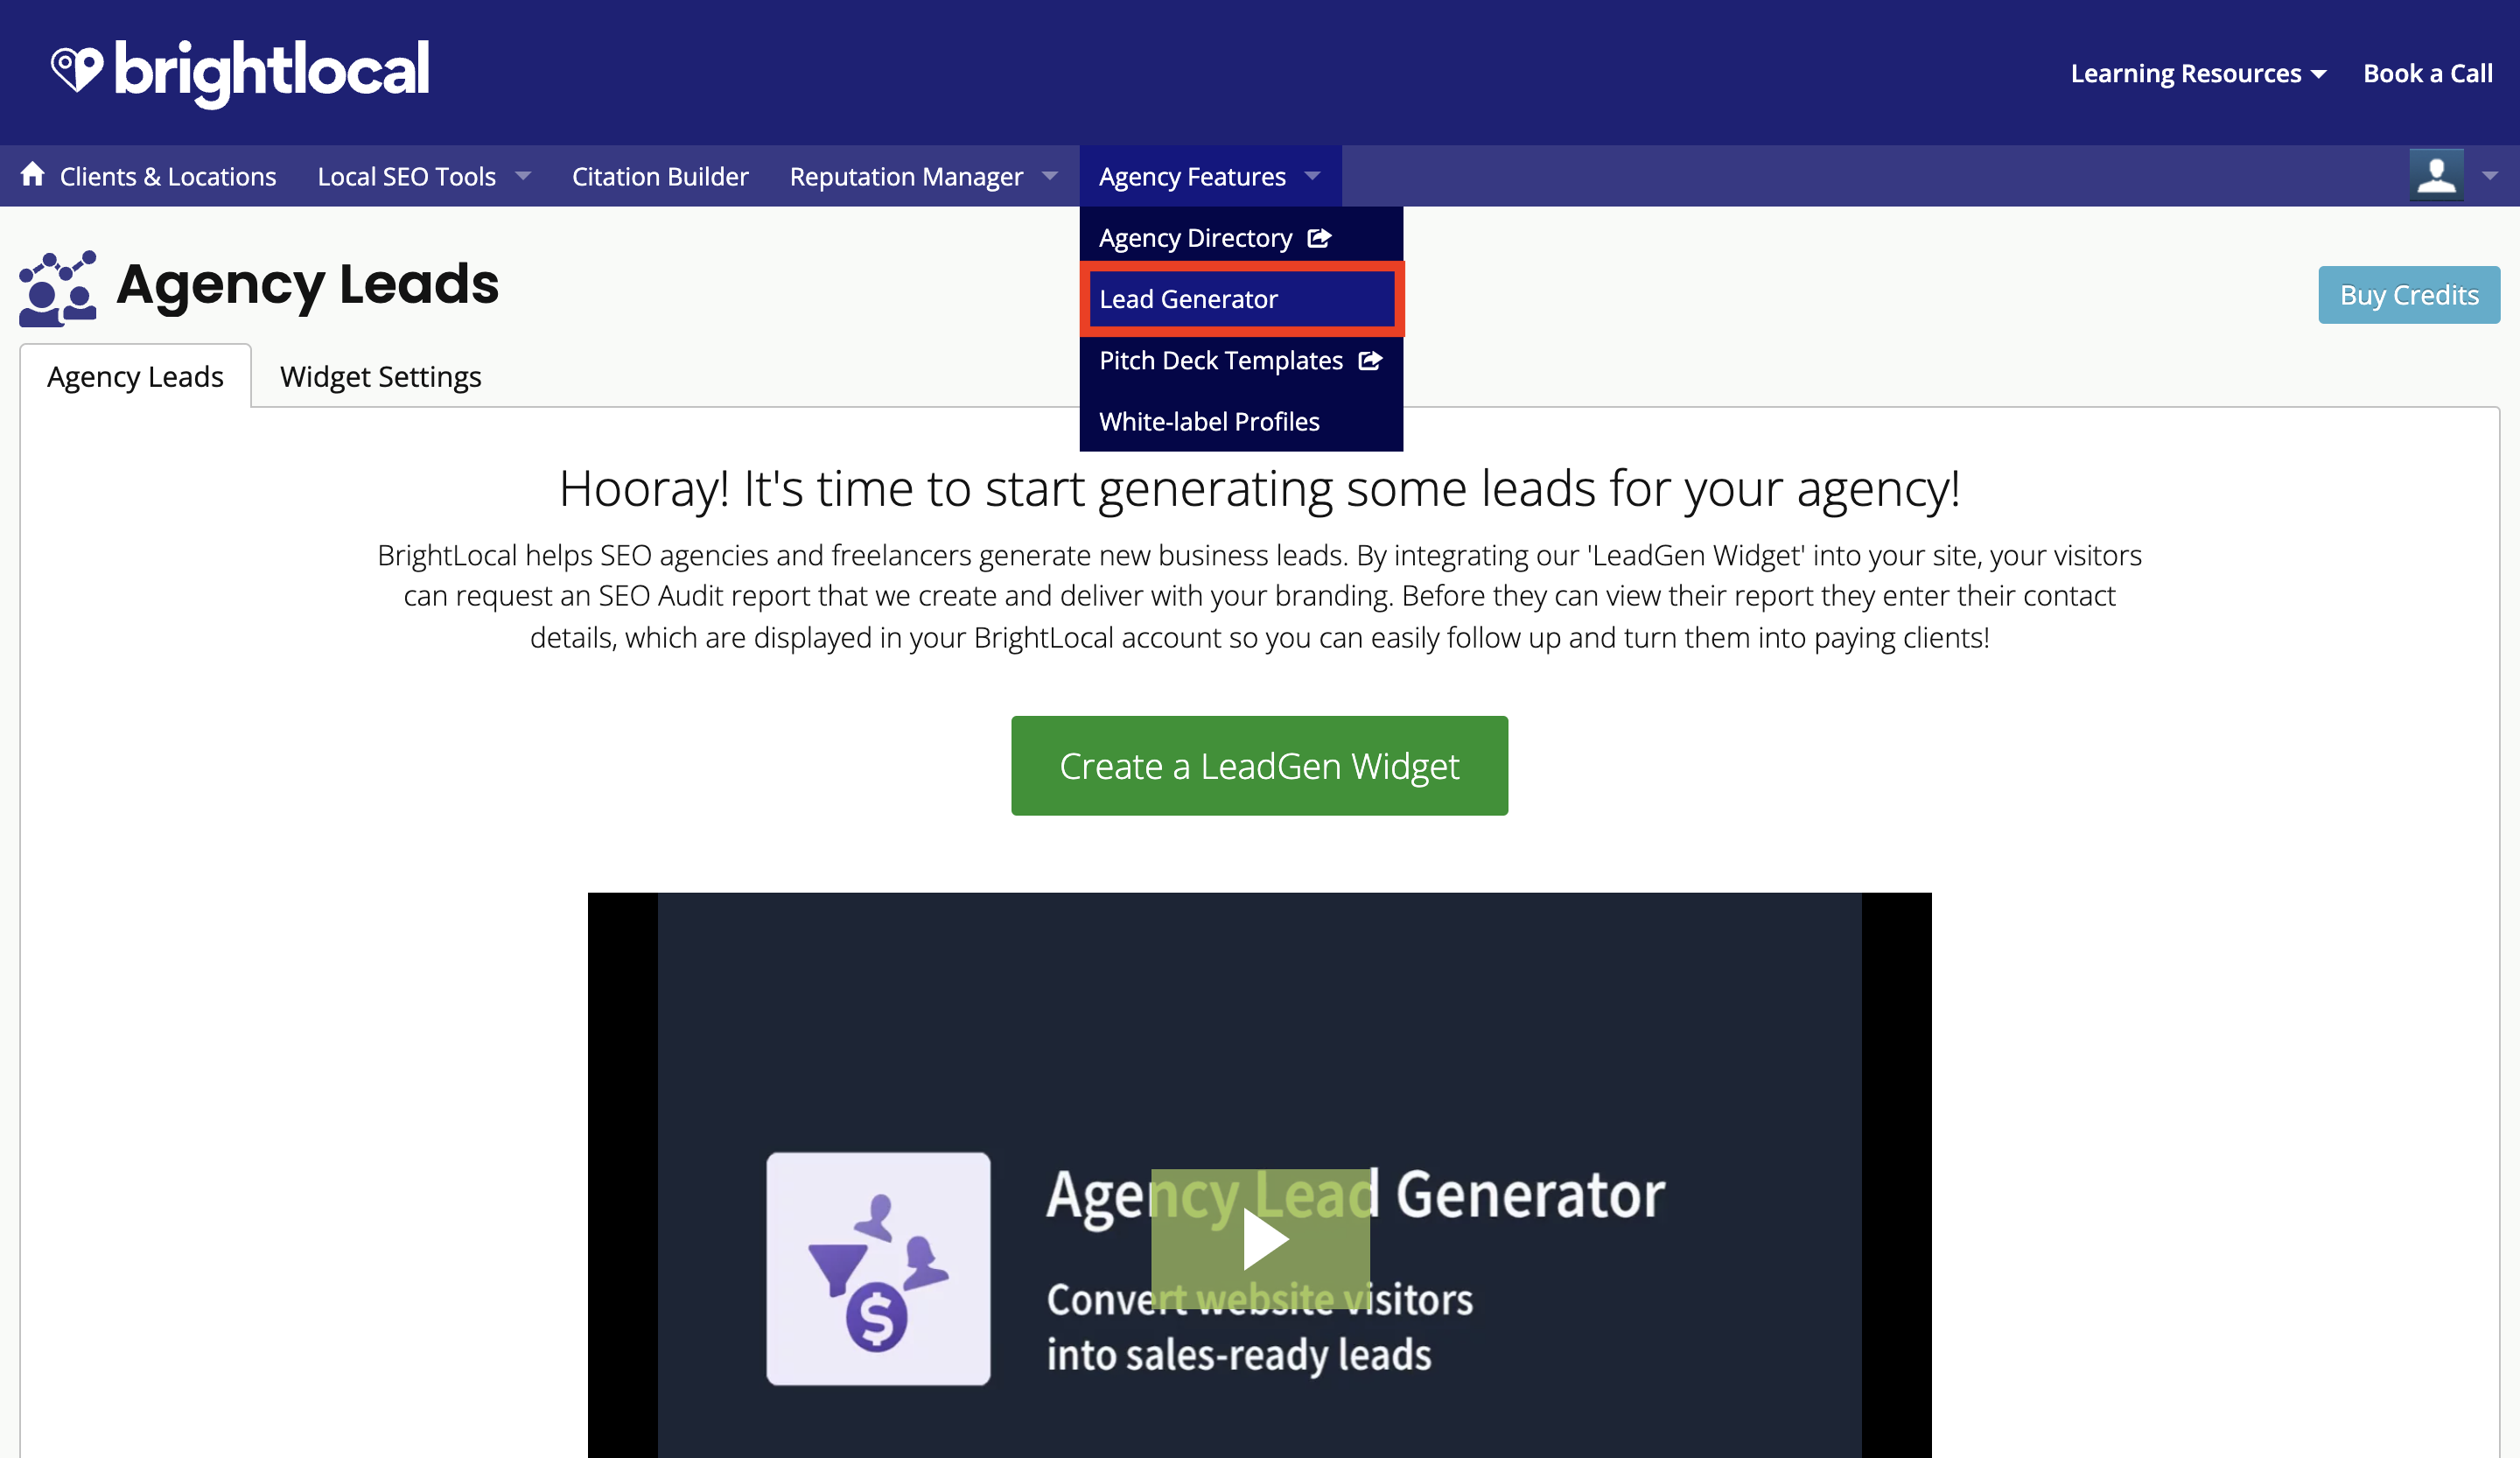 1-How_to_create_an_Agency_Lead_Generator_widget.png